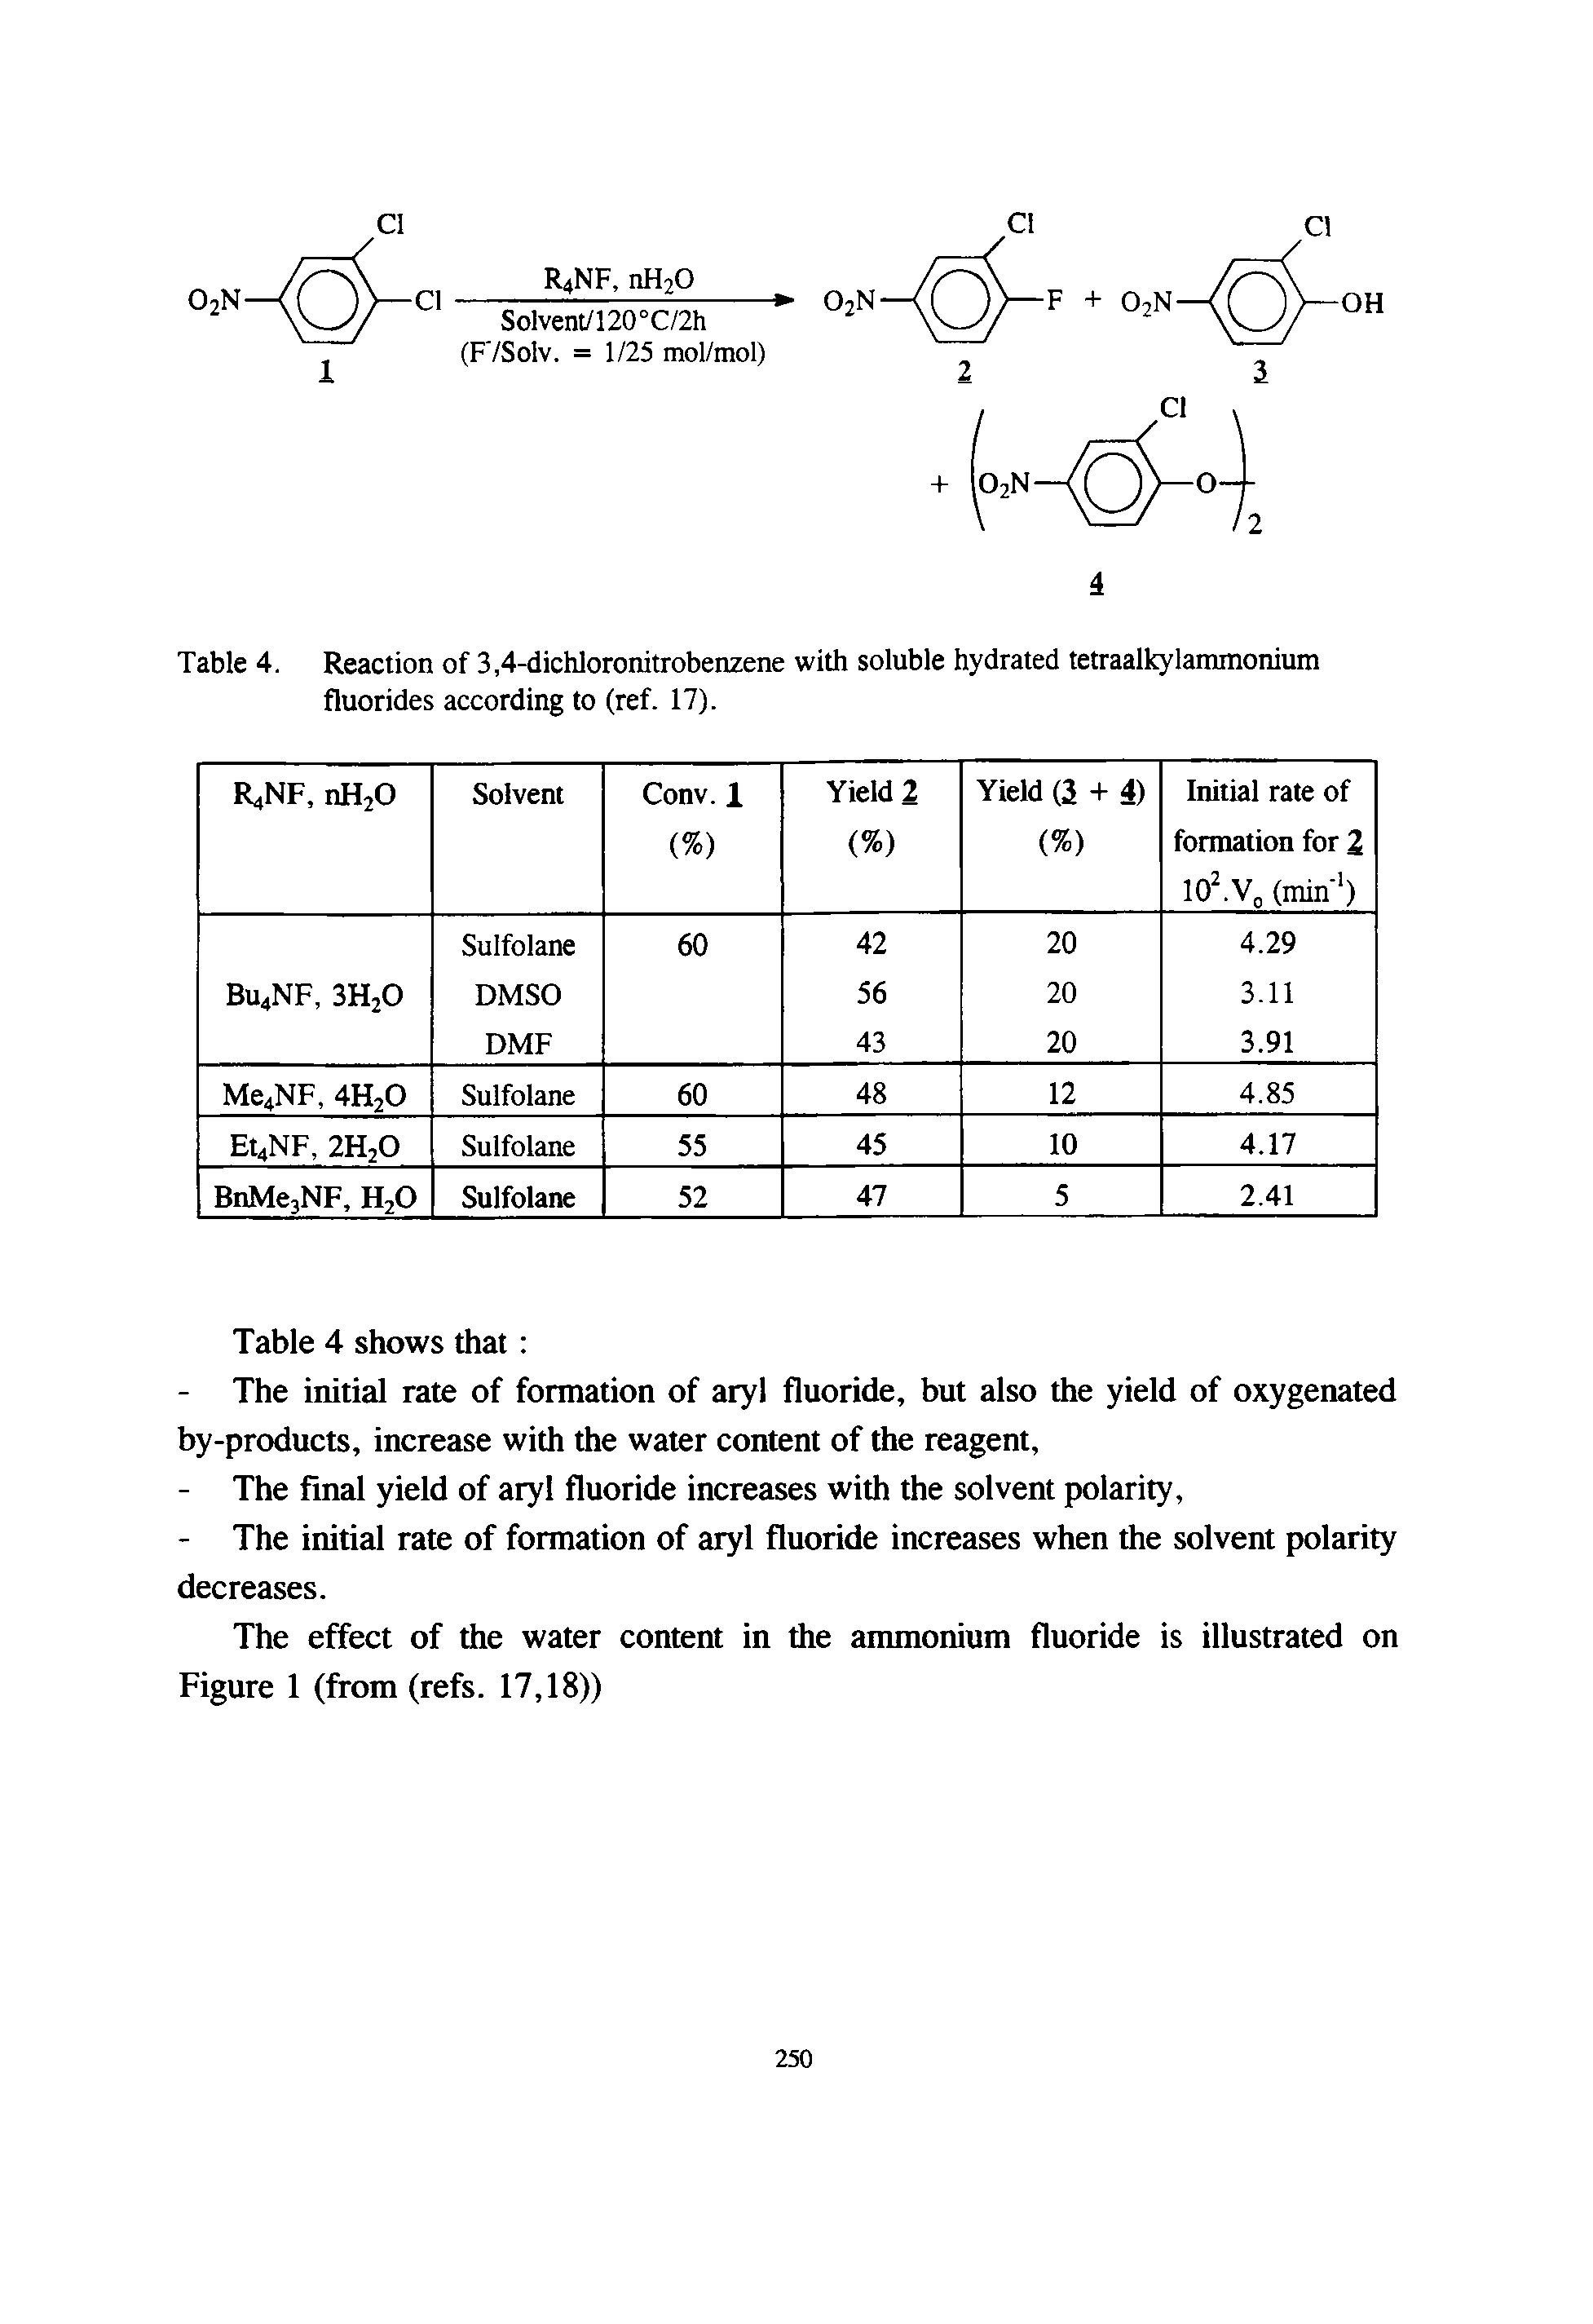 Table 4. Reaction of 3,4-dichloronitrobenzene with soluble hydrated tetraalkylammonium fluorides according to (ref. 17).